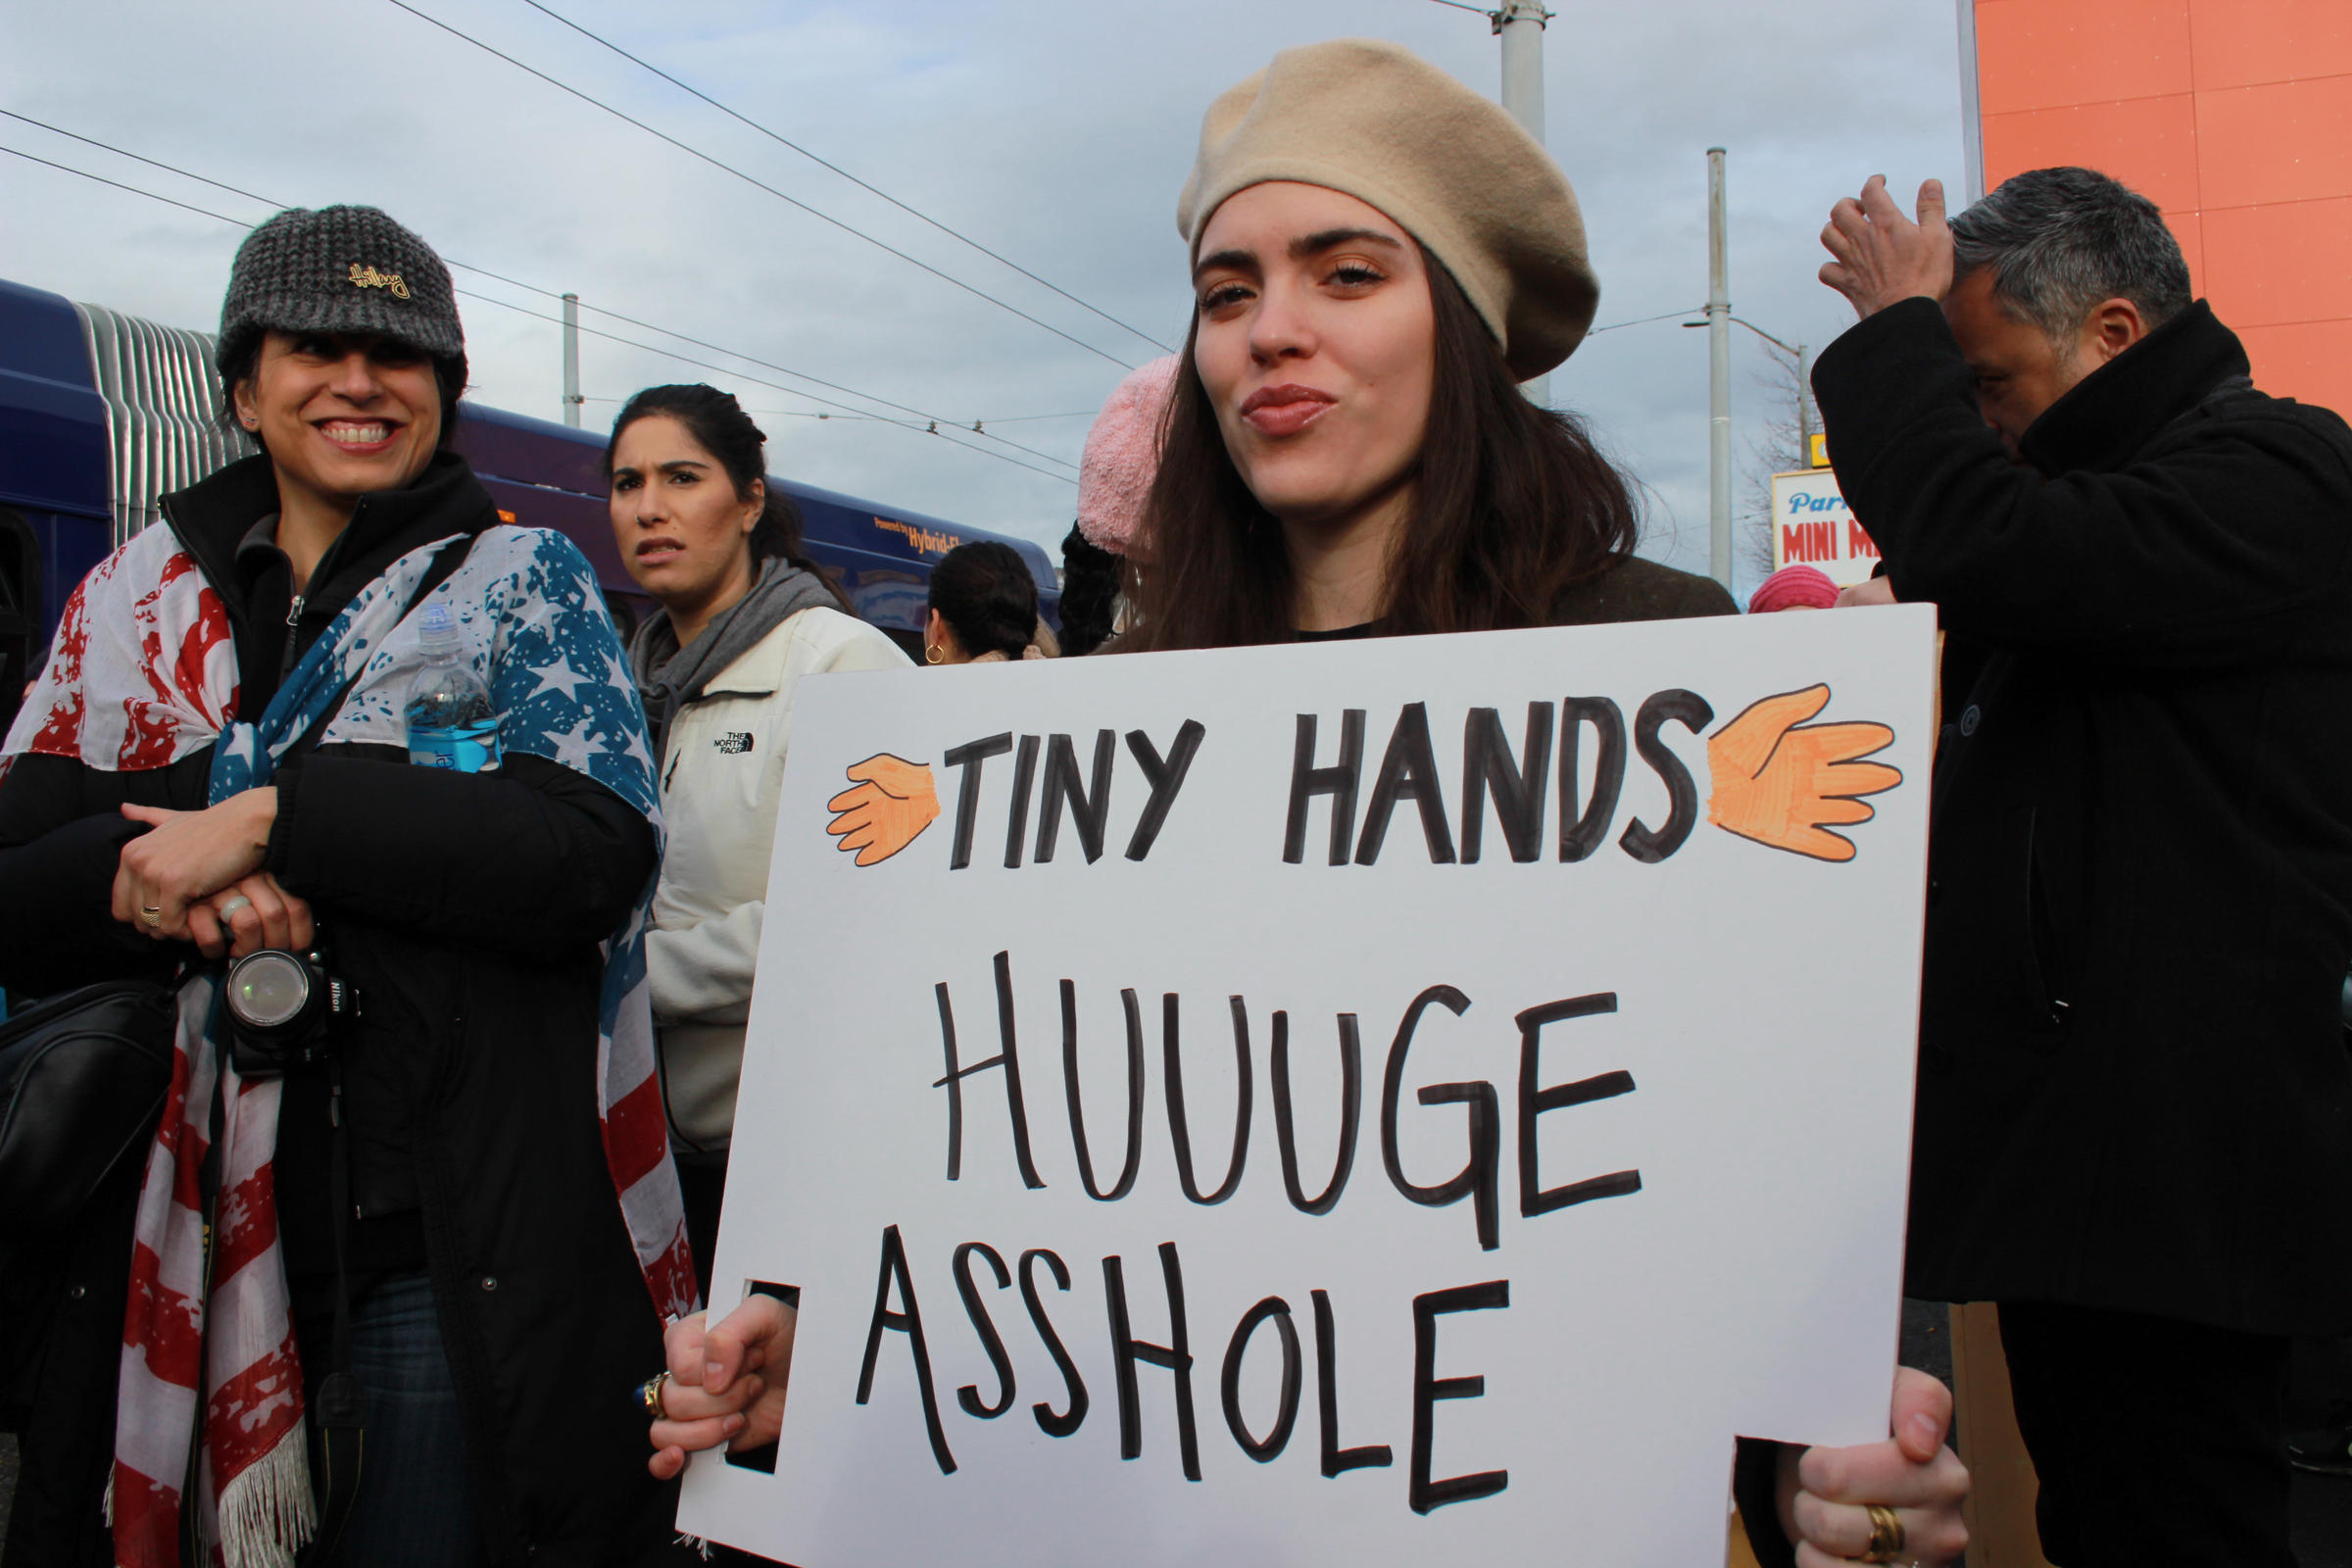 Top Protest Signs - Tiny Hands Huuuge Asshole